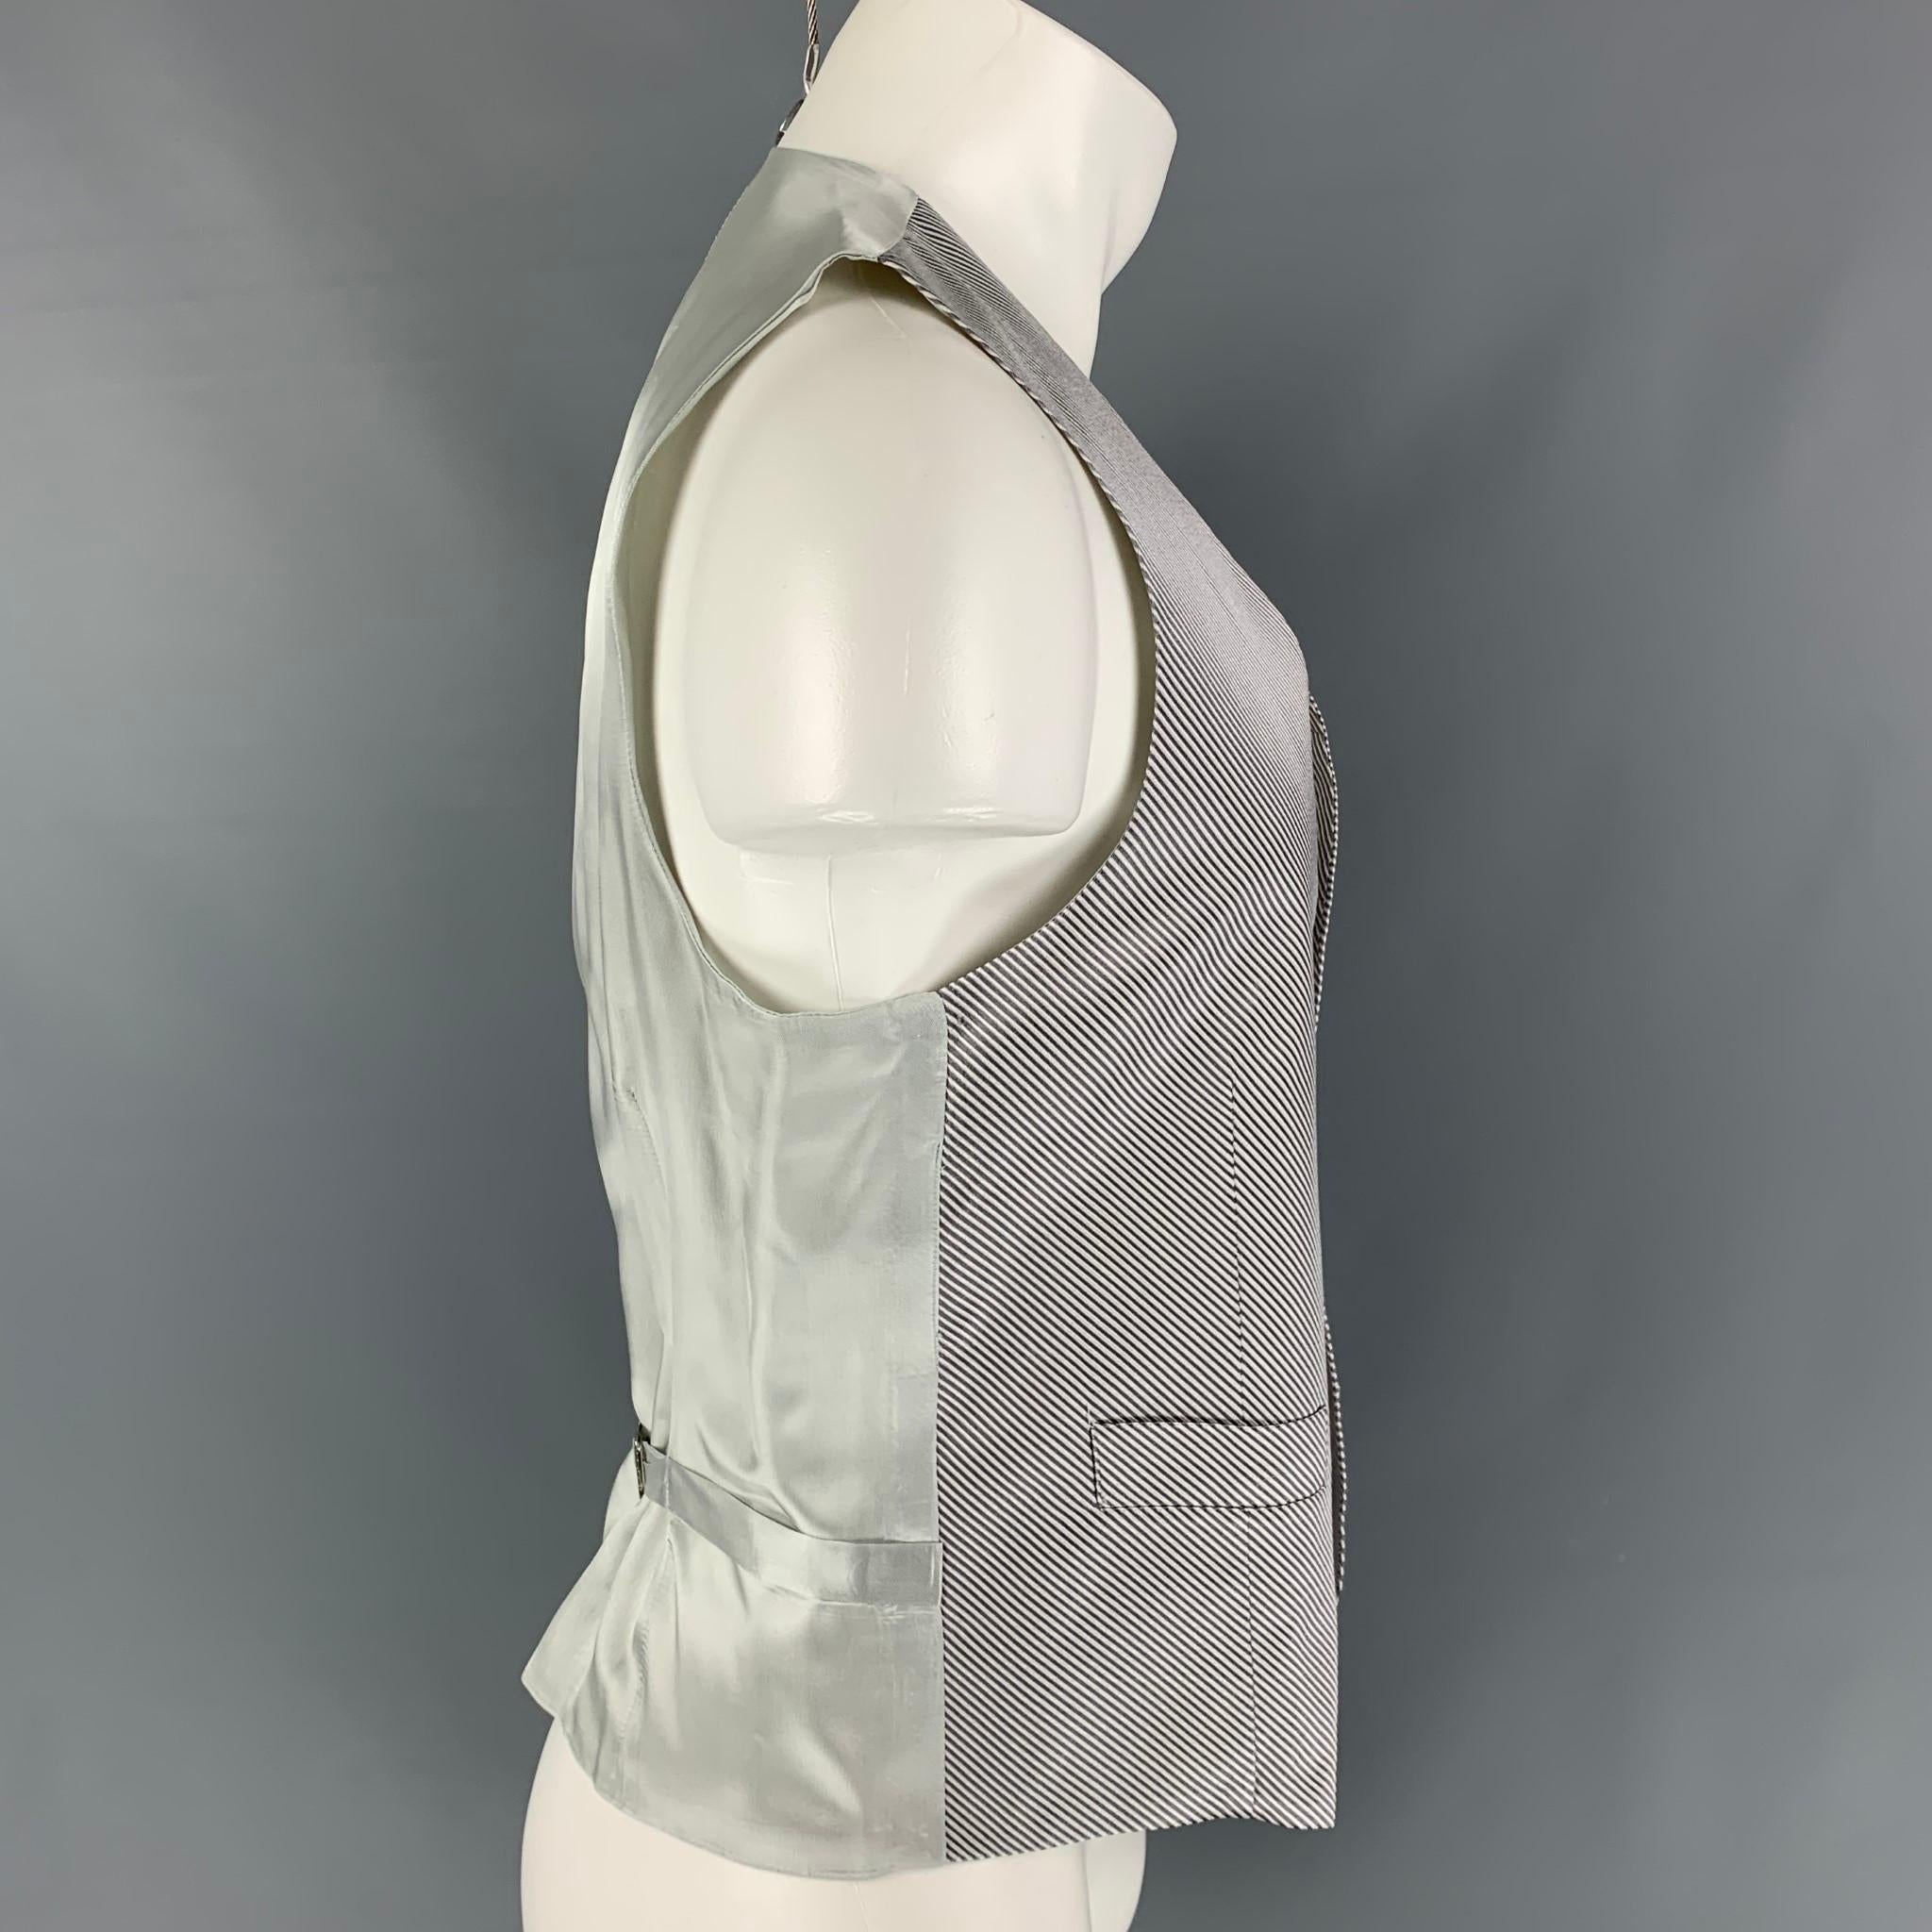 BARNEY'S NEW YORK vest comes in a silver diagonal stripe silk featuring a back belt, front pockets, and a buttoned closure. Made in Italy. 

Very Good Pre-Owned Condition.
Marked: 40

Measurements:

Shoulder: 14 in.
Chest: 40 in.
Length: 23 in. 